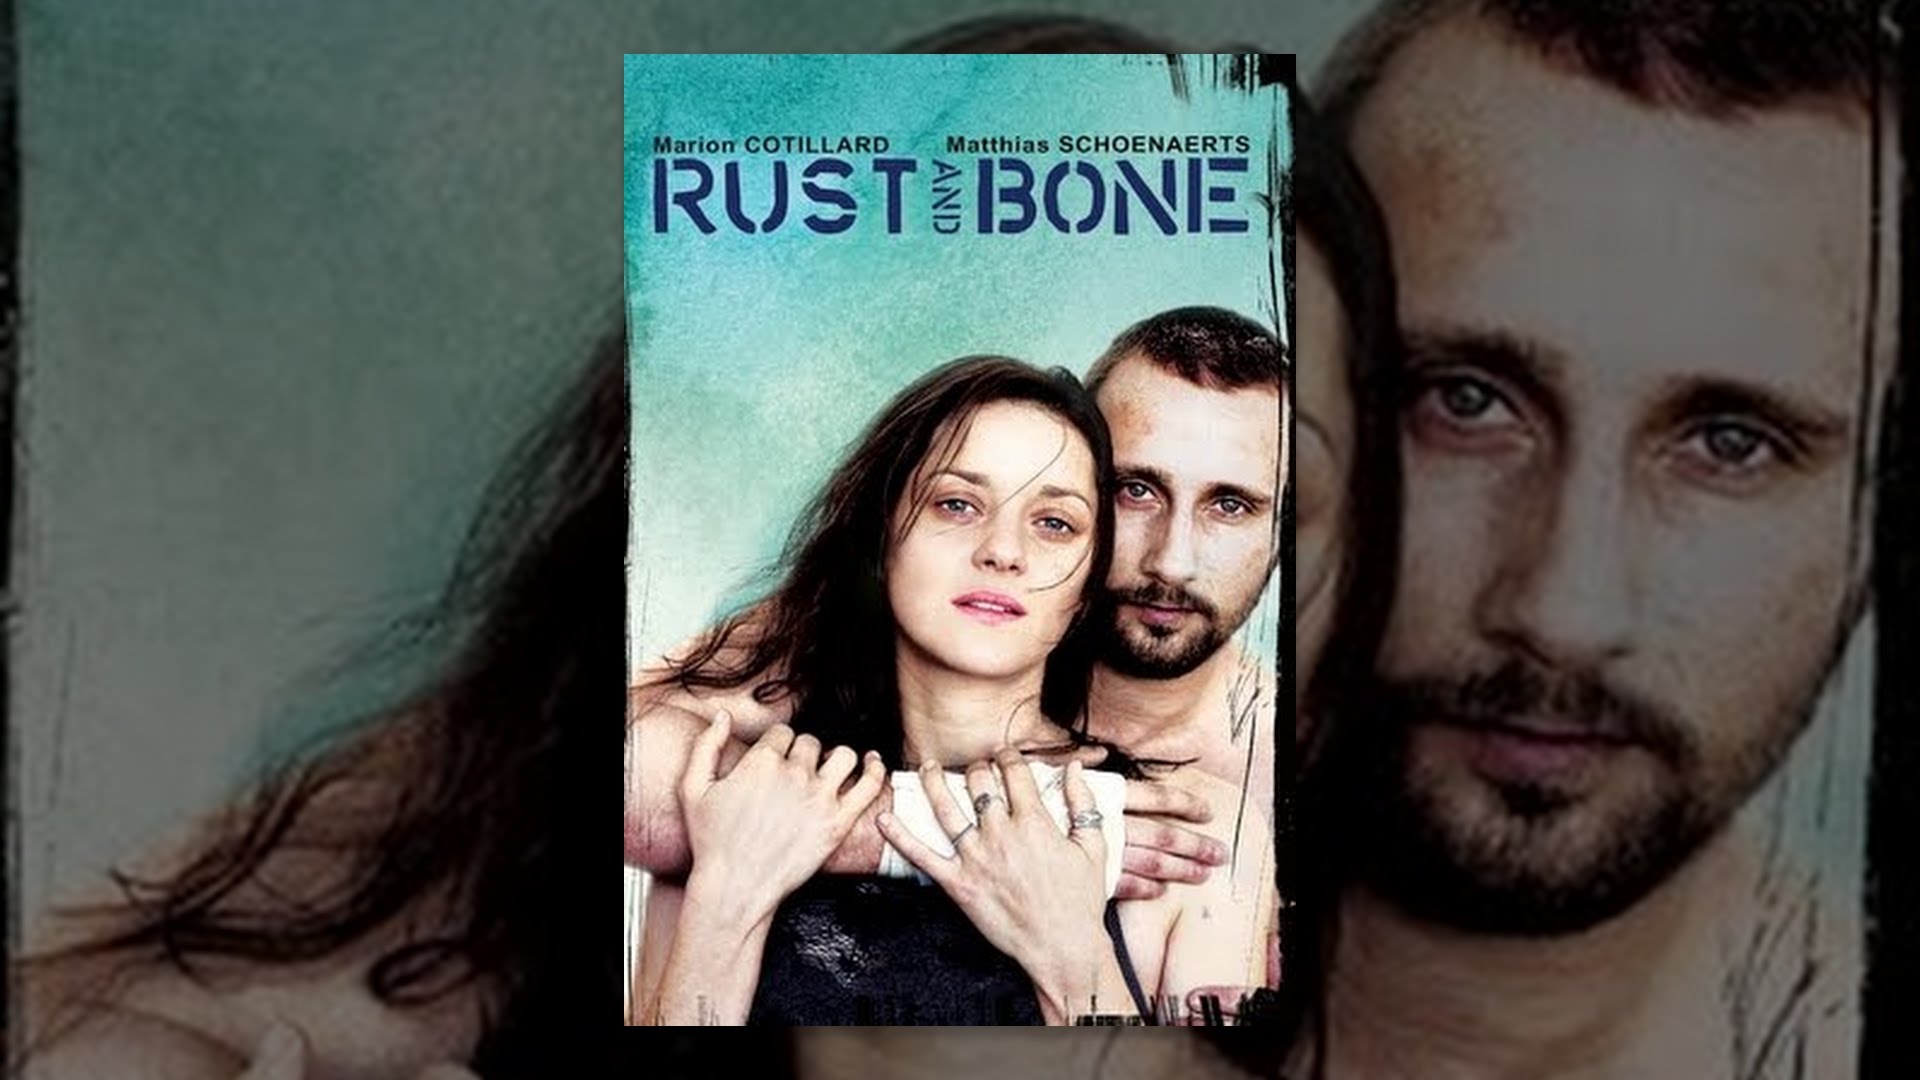 From rust and bone фото 83